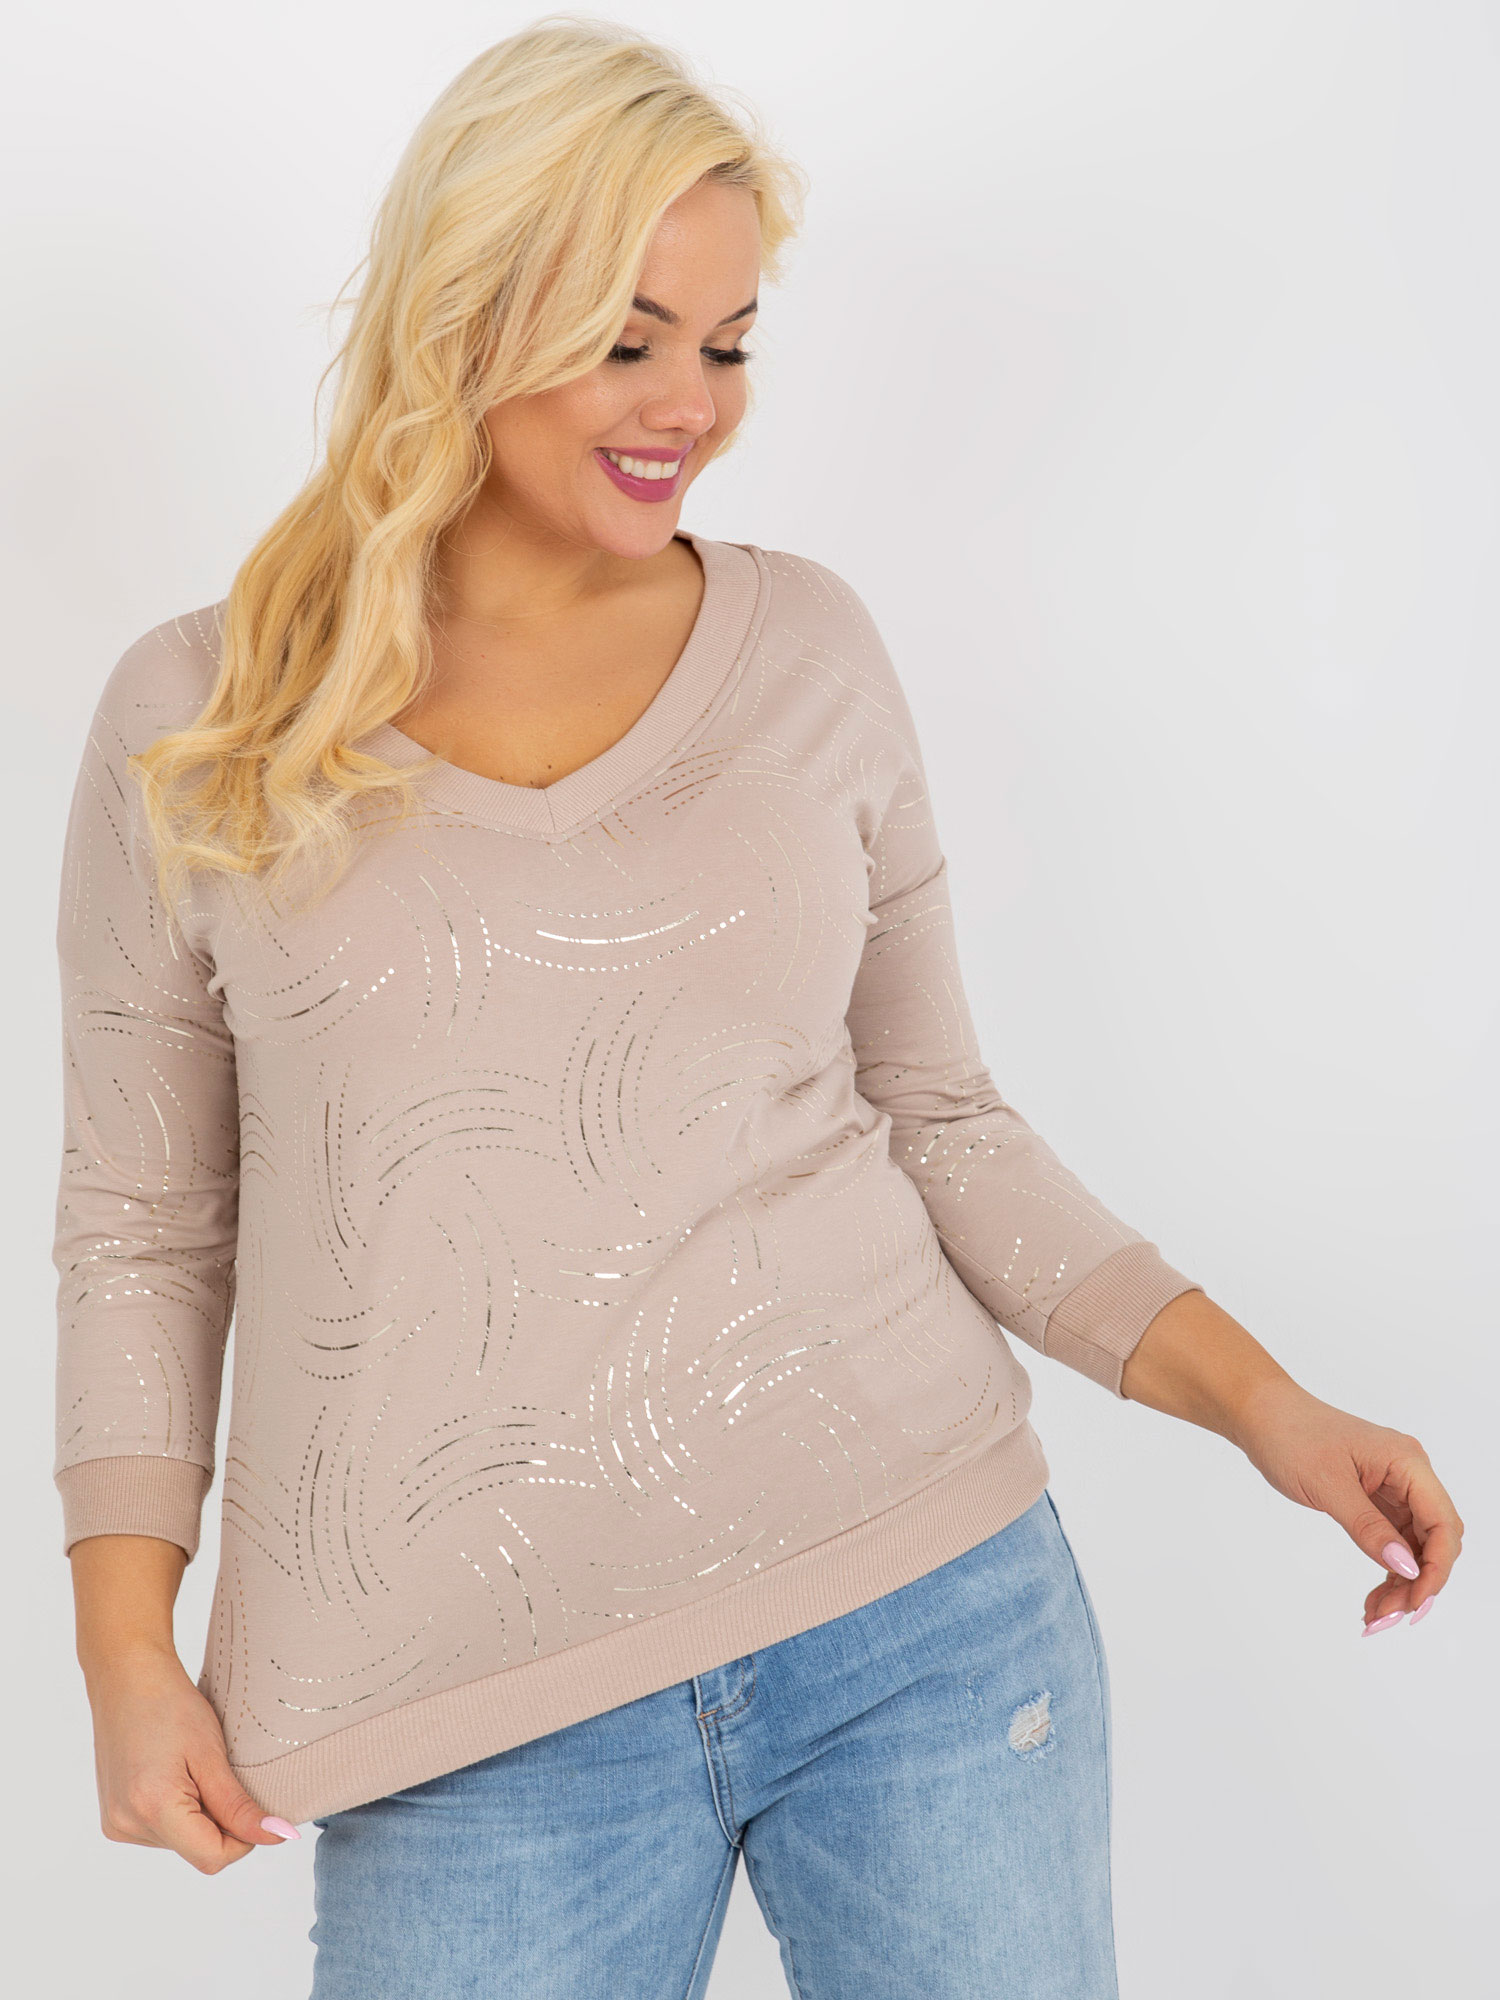 Beige Blouse Plus Size With Glossy Print